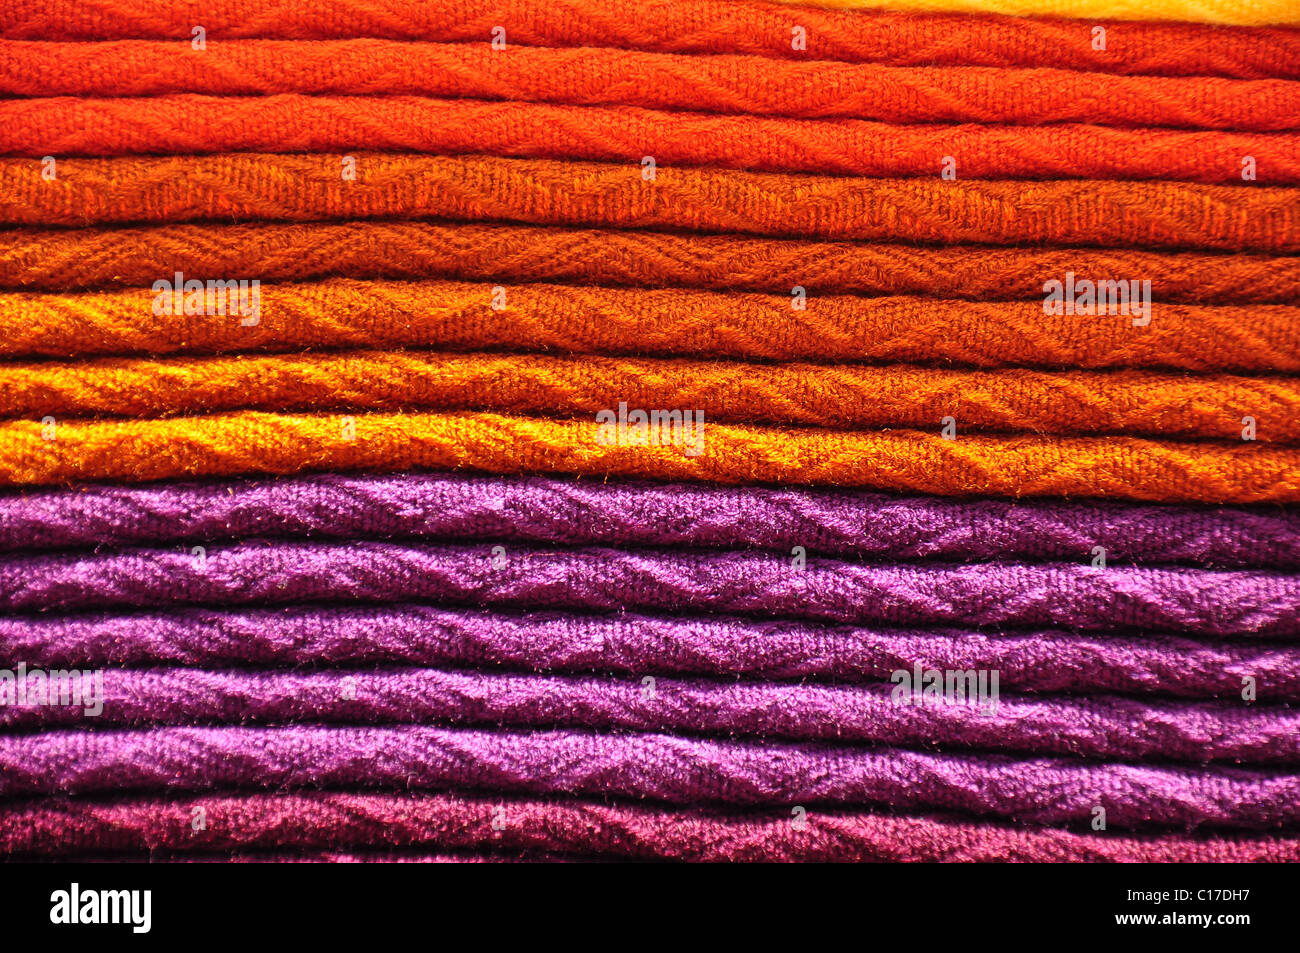 Stack of traditional woven alpaca blankets in orange and purple Stock Photo